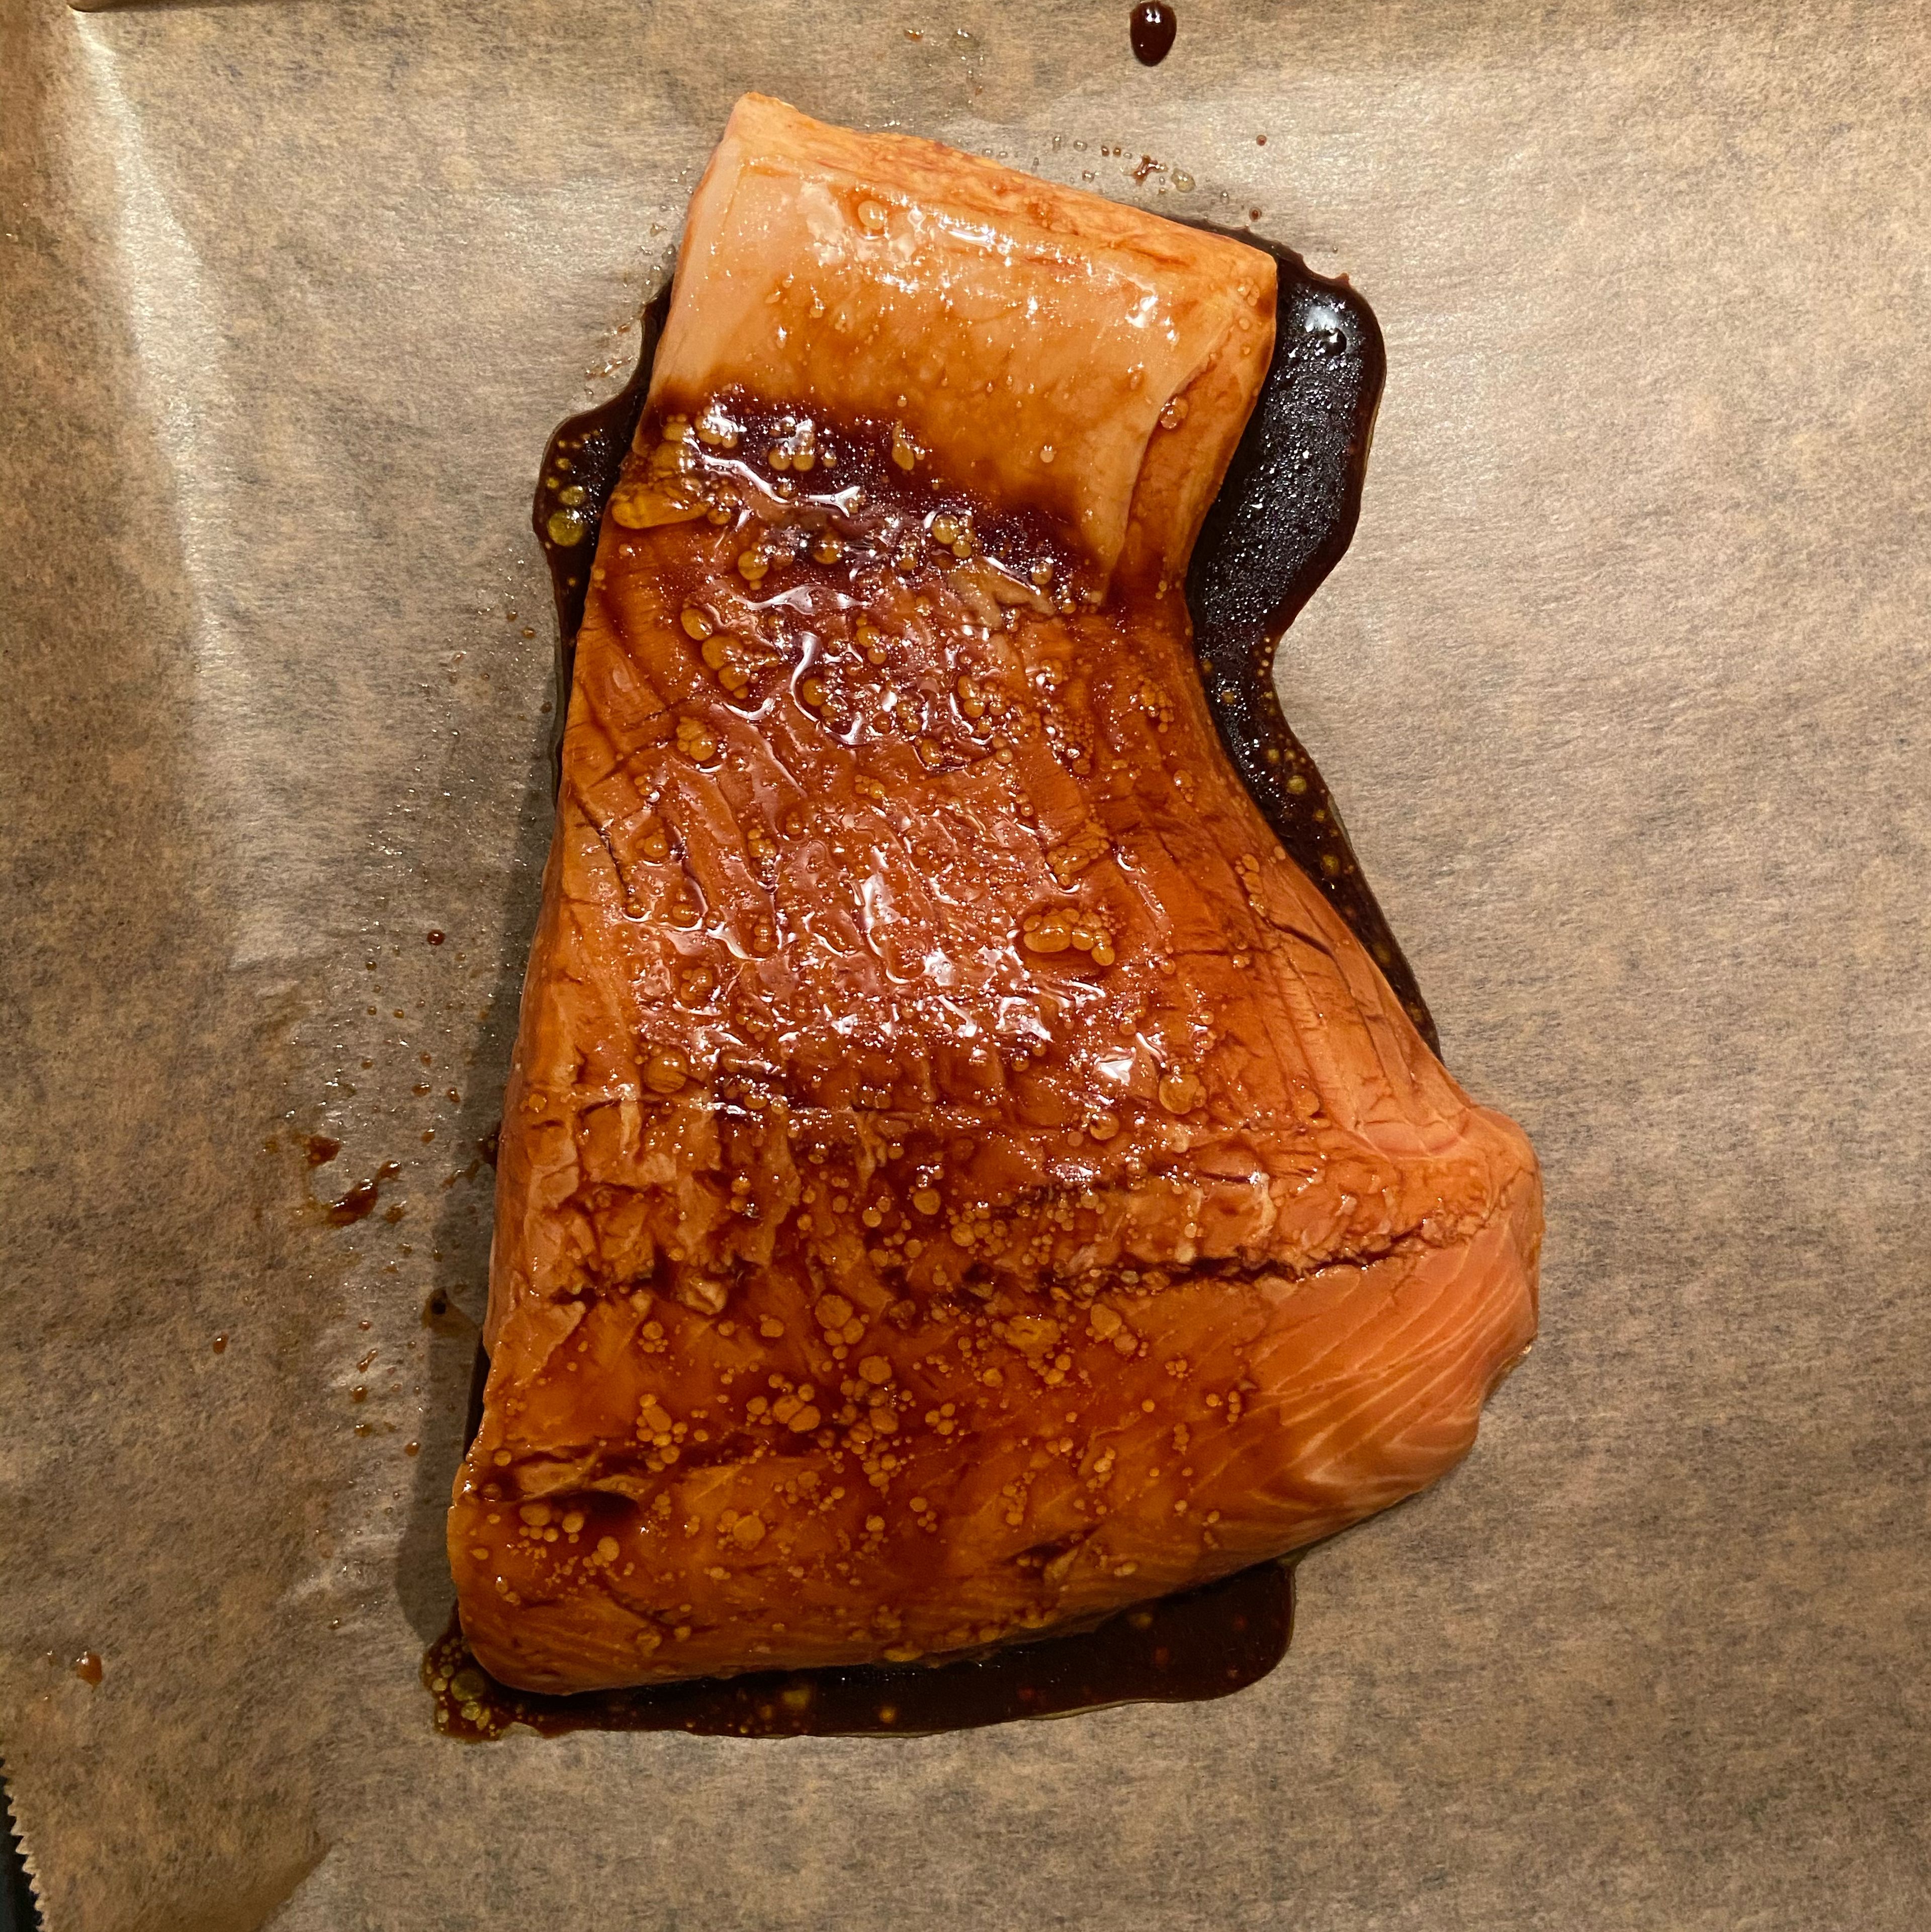 Mix soy sauce and apple cider vinegar in a bowl, add the salmon fillet and let it marinate for at least 10 minutes. Then place the salmon fillet on a baking sheet and cover it with the rest of the marinade sauce.